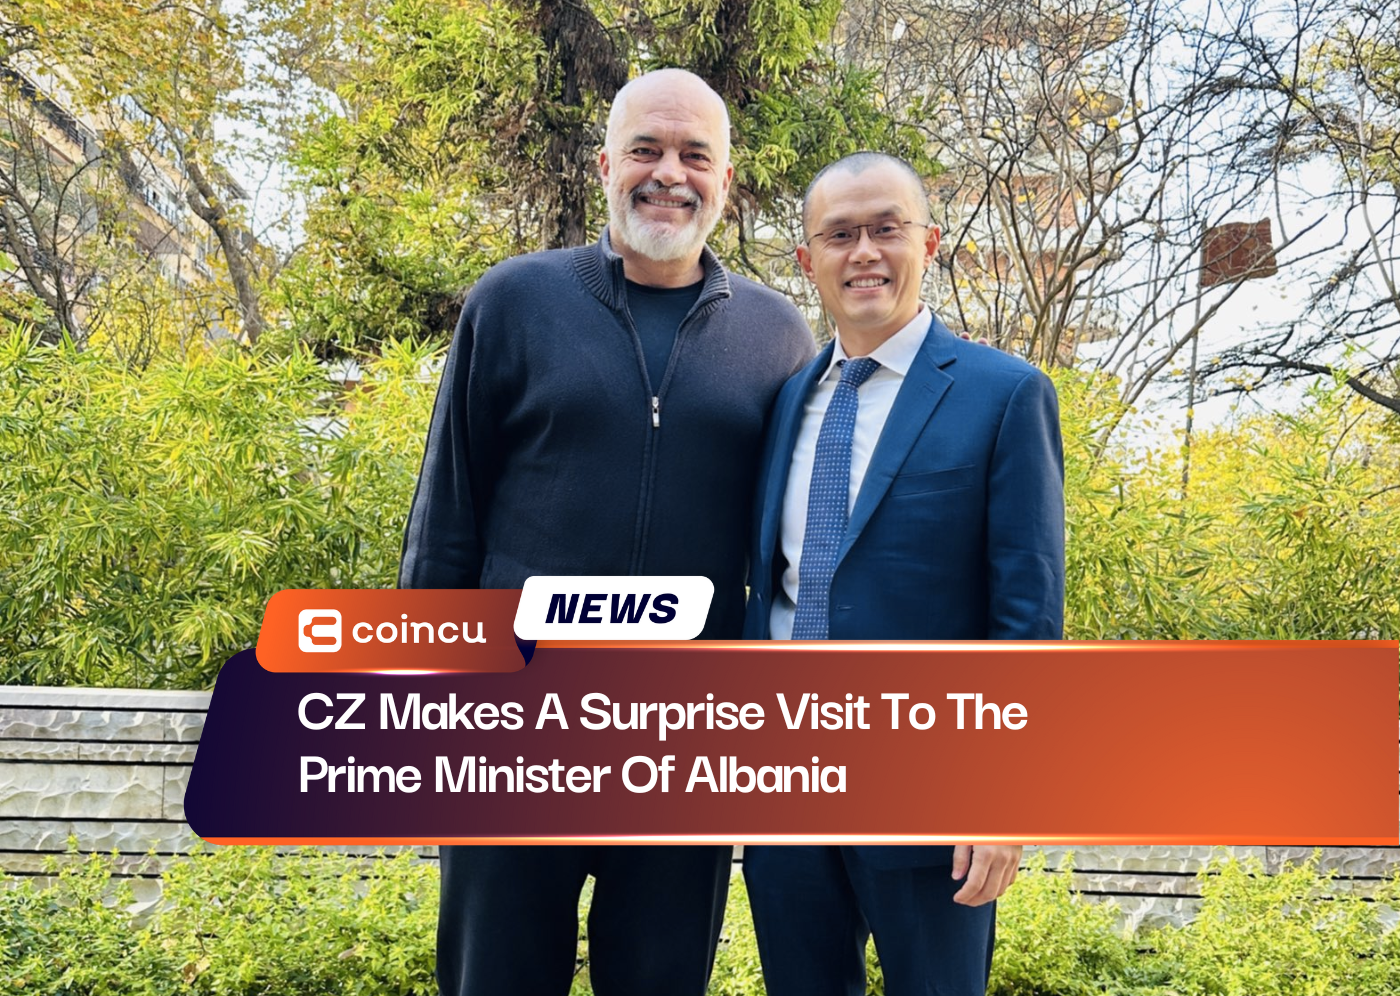 CZ Makes A Surprise Visit To The Prime Minister Of Albania